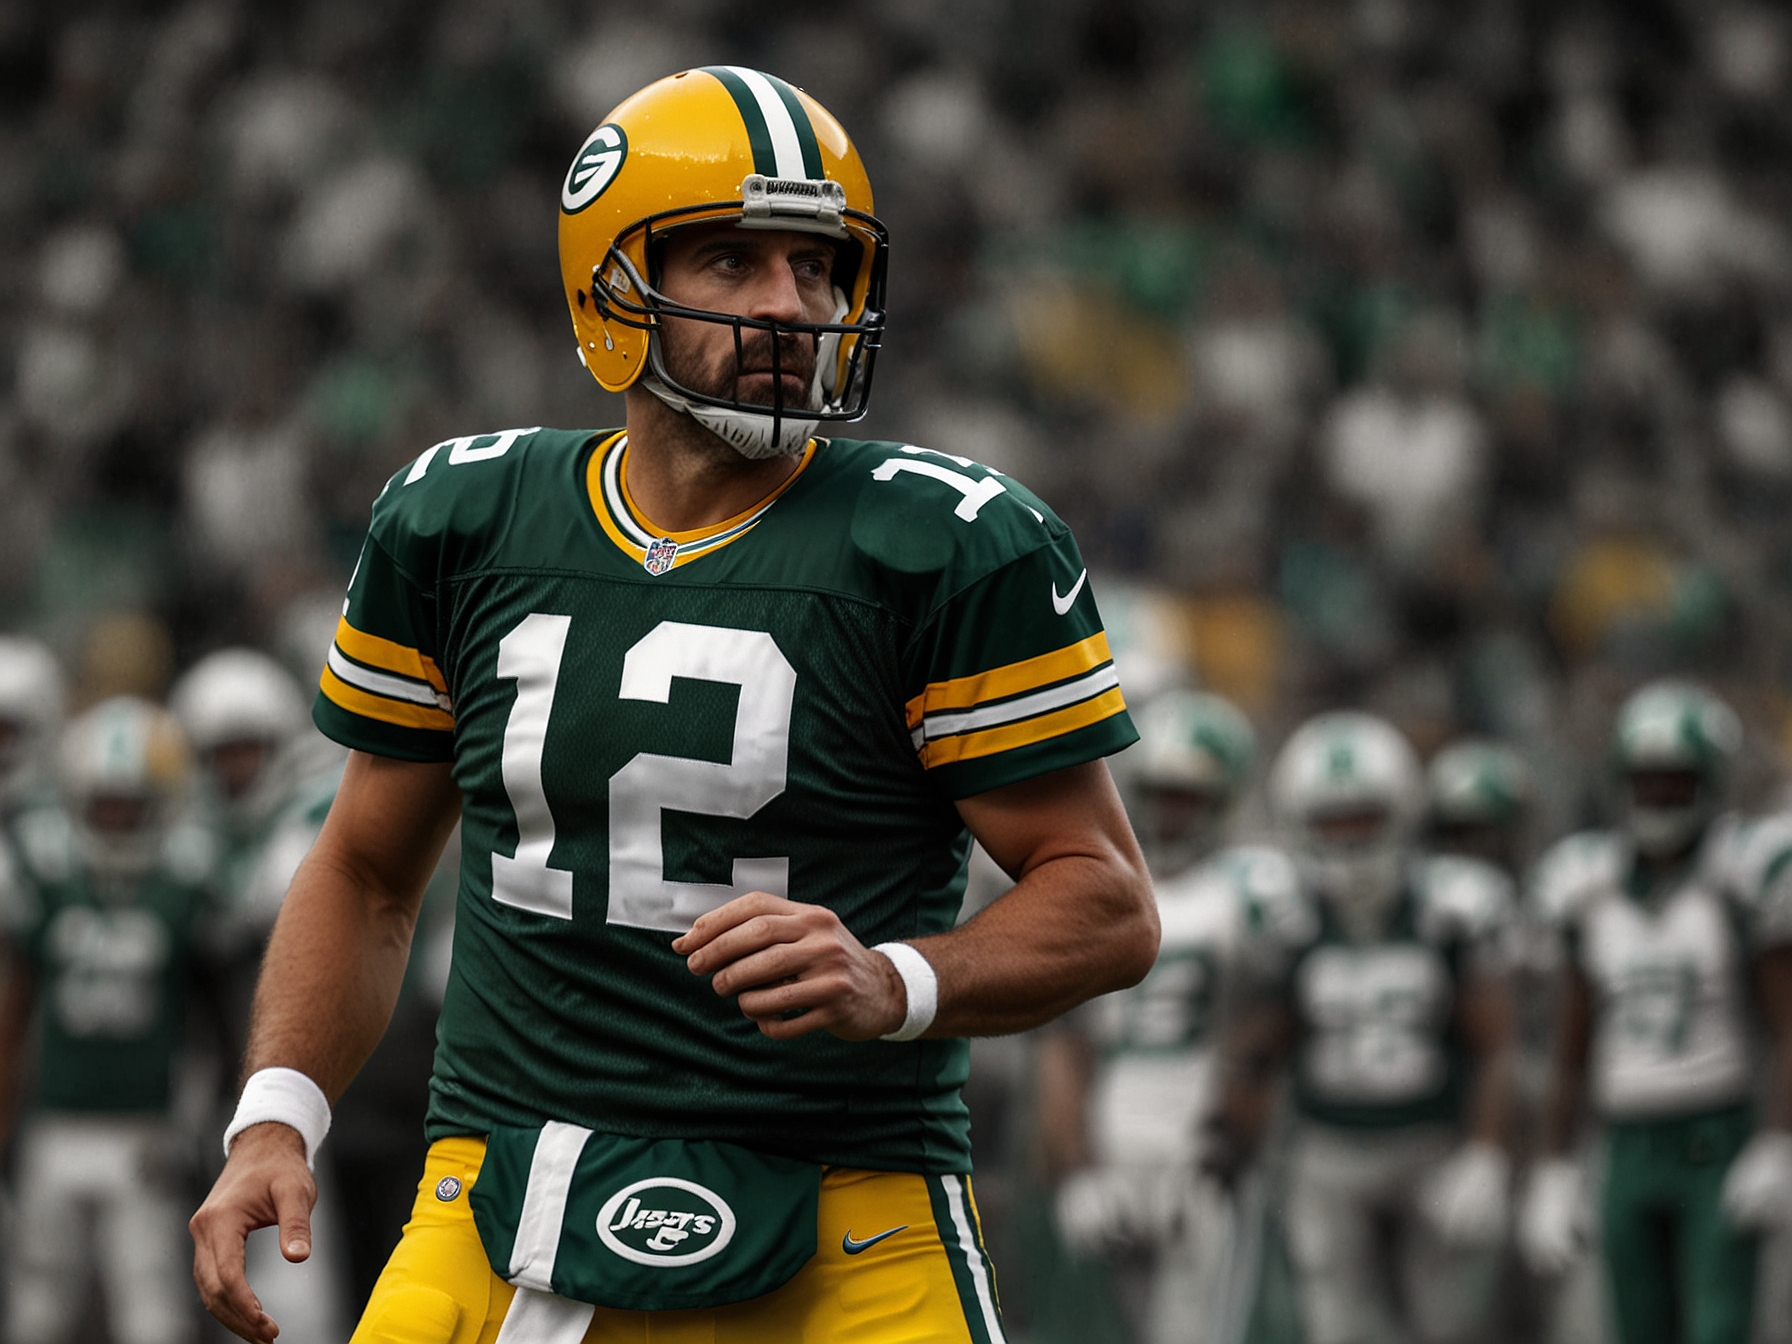 Aaron Rodgers in action during his debut game with the New York Jets, showcasing his passing accuracy and veteran decision-making on the field.